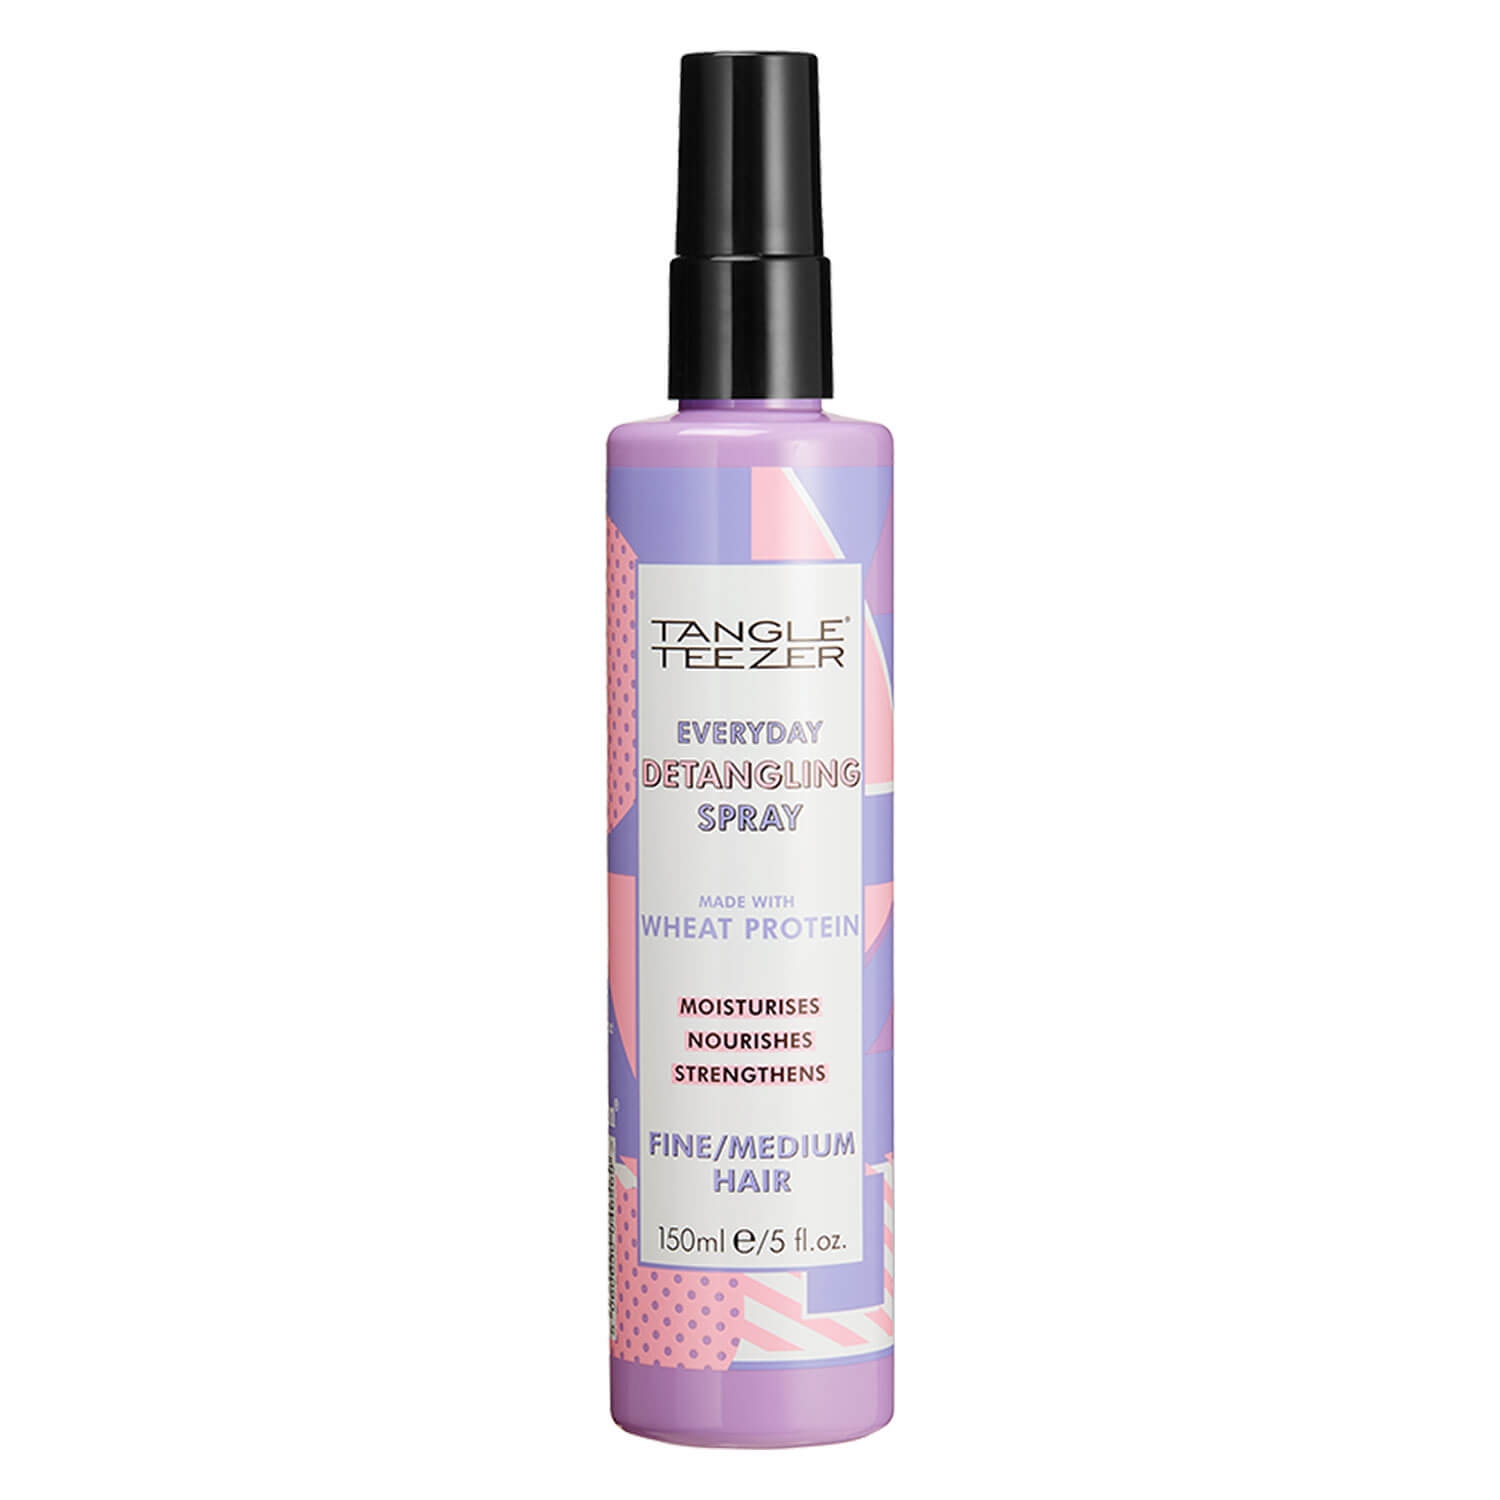 Product image from Tangle Teezer - Everyday Detangling Spray